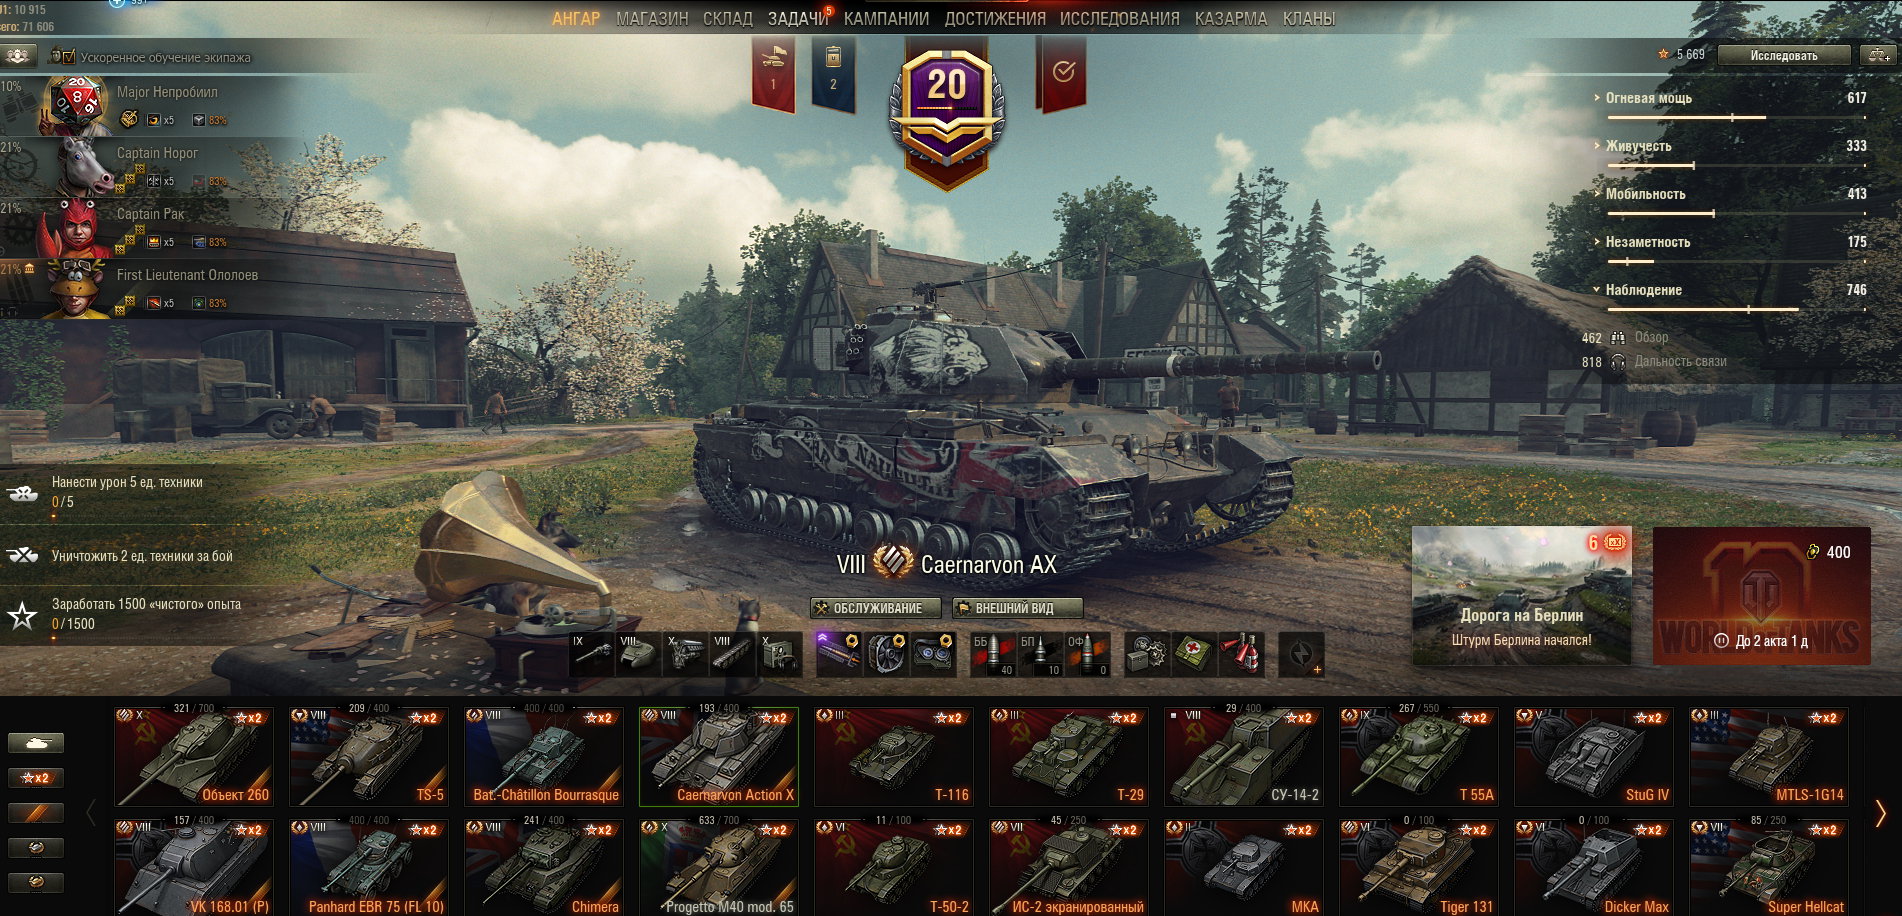 World of Tanks account from 45000 + fights 24 Prem.tank